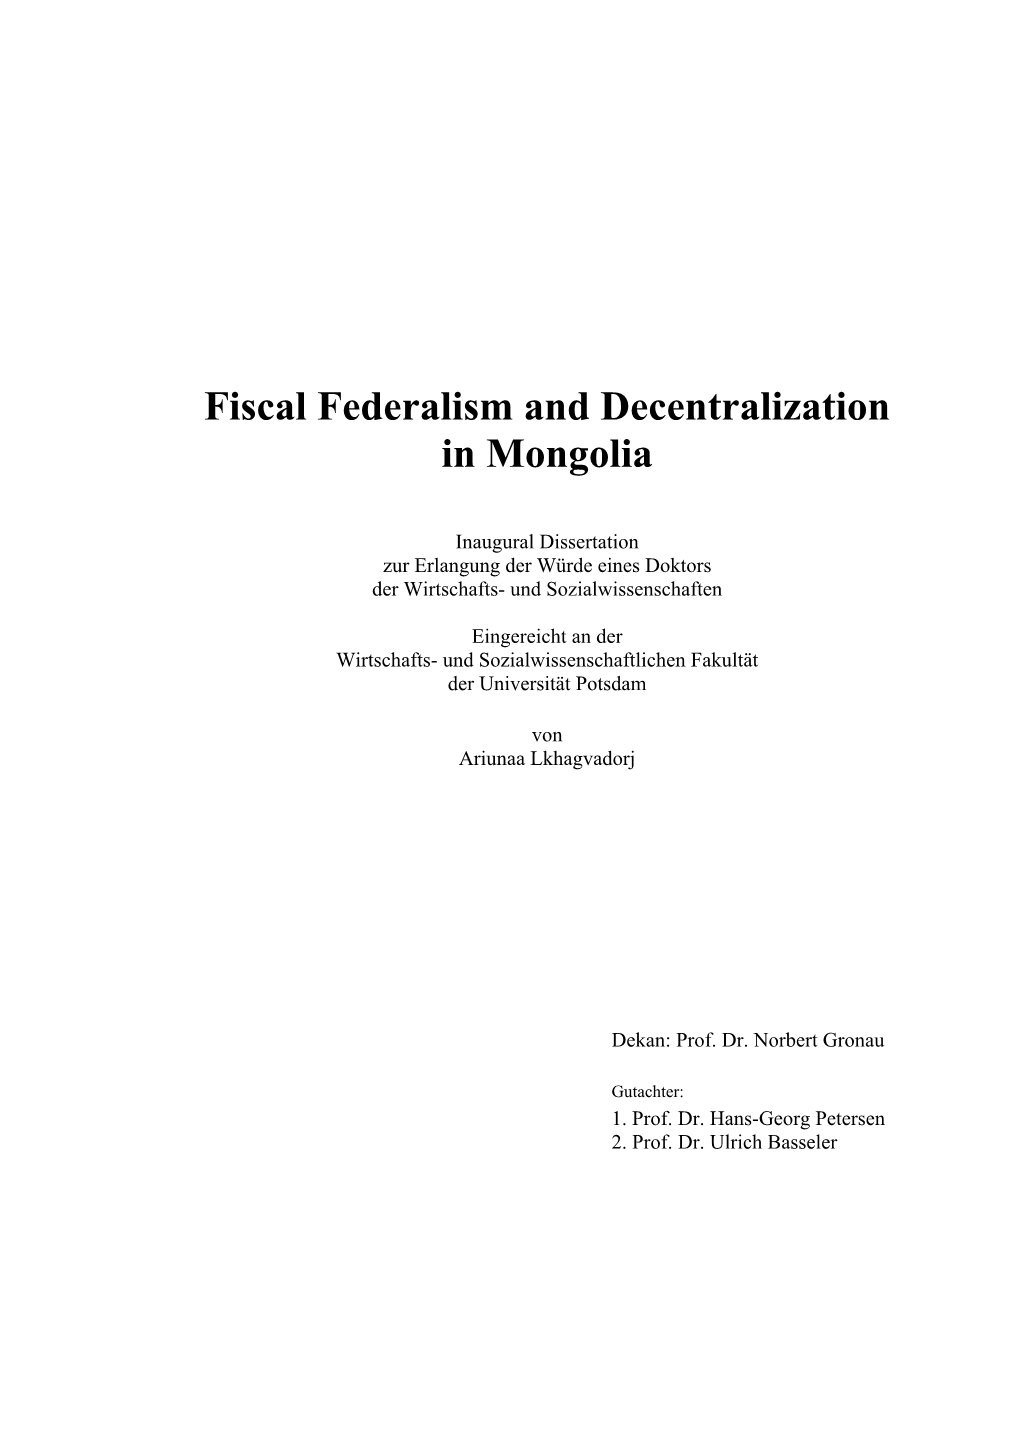 There Is Vast Literature on Fiscal Federalism and Many Authors State